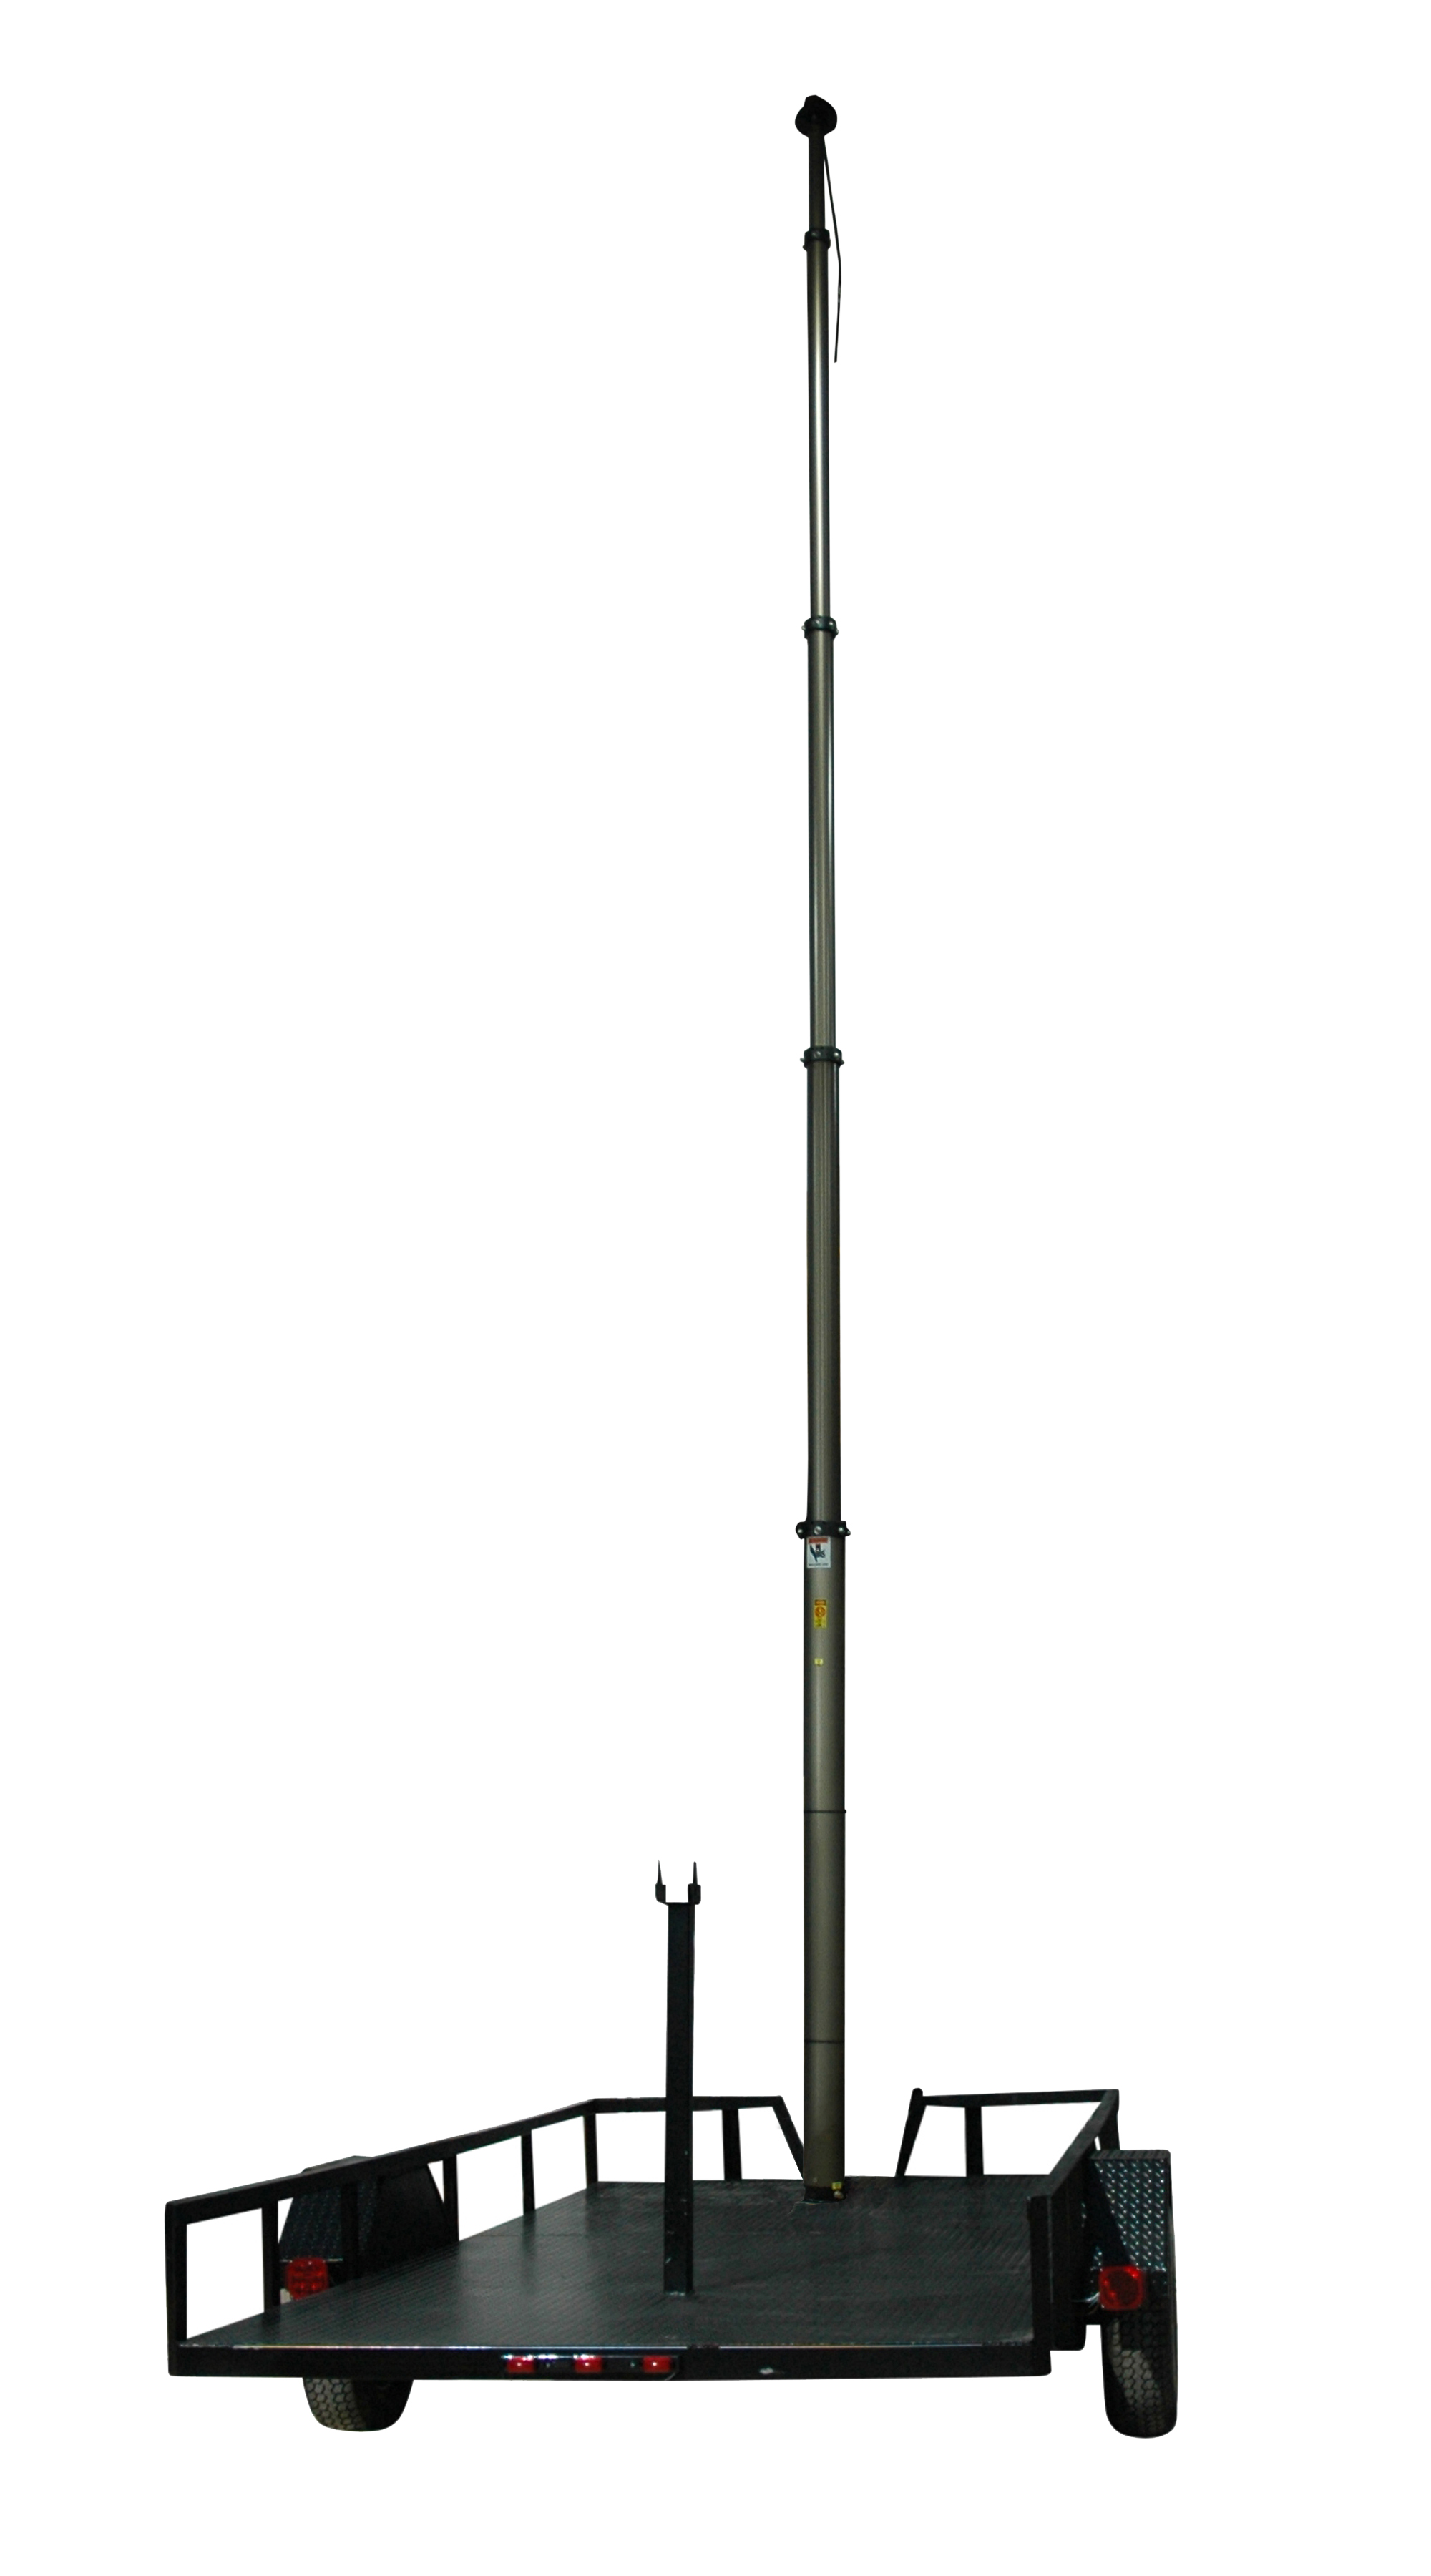 The PLM-30-TLR Trailer Mounted Pneumatic Light Tower from Larson Electronics is a 30 foot extendable pneumatic light tower that can be equipped with high output LED, HID, Halogen, or Metal Halide ligh